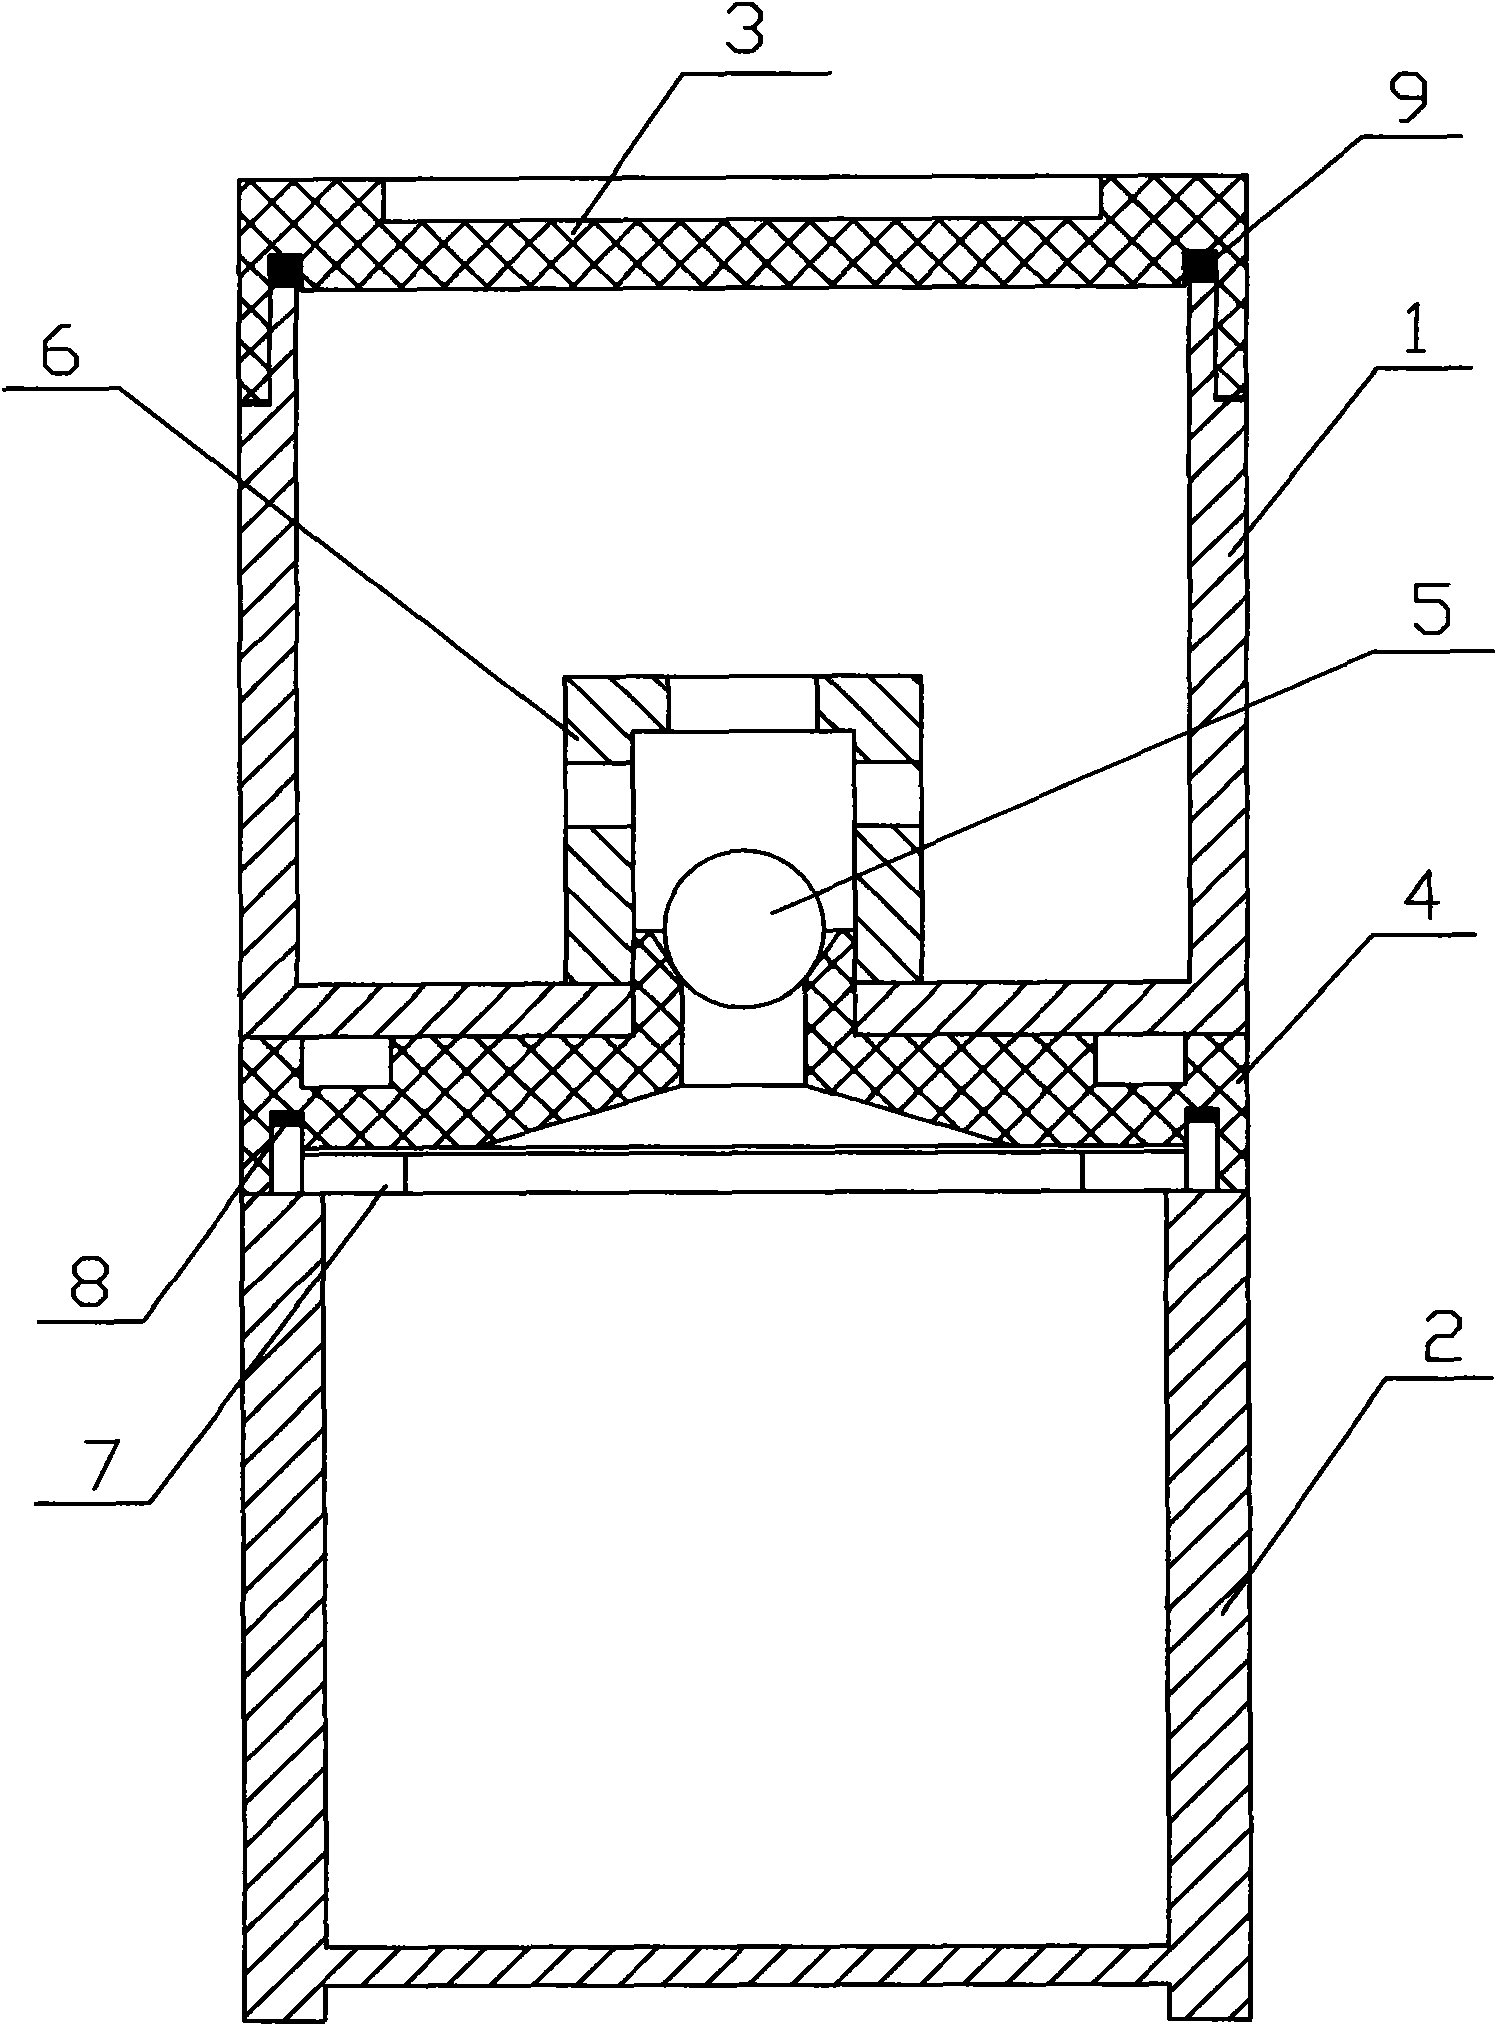 Double-cup connected and invertible tea leaf-separating teacup